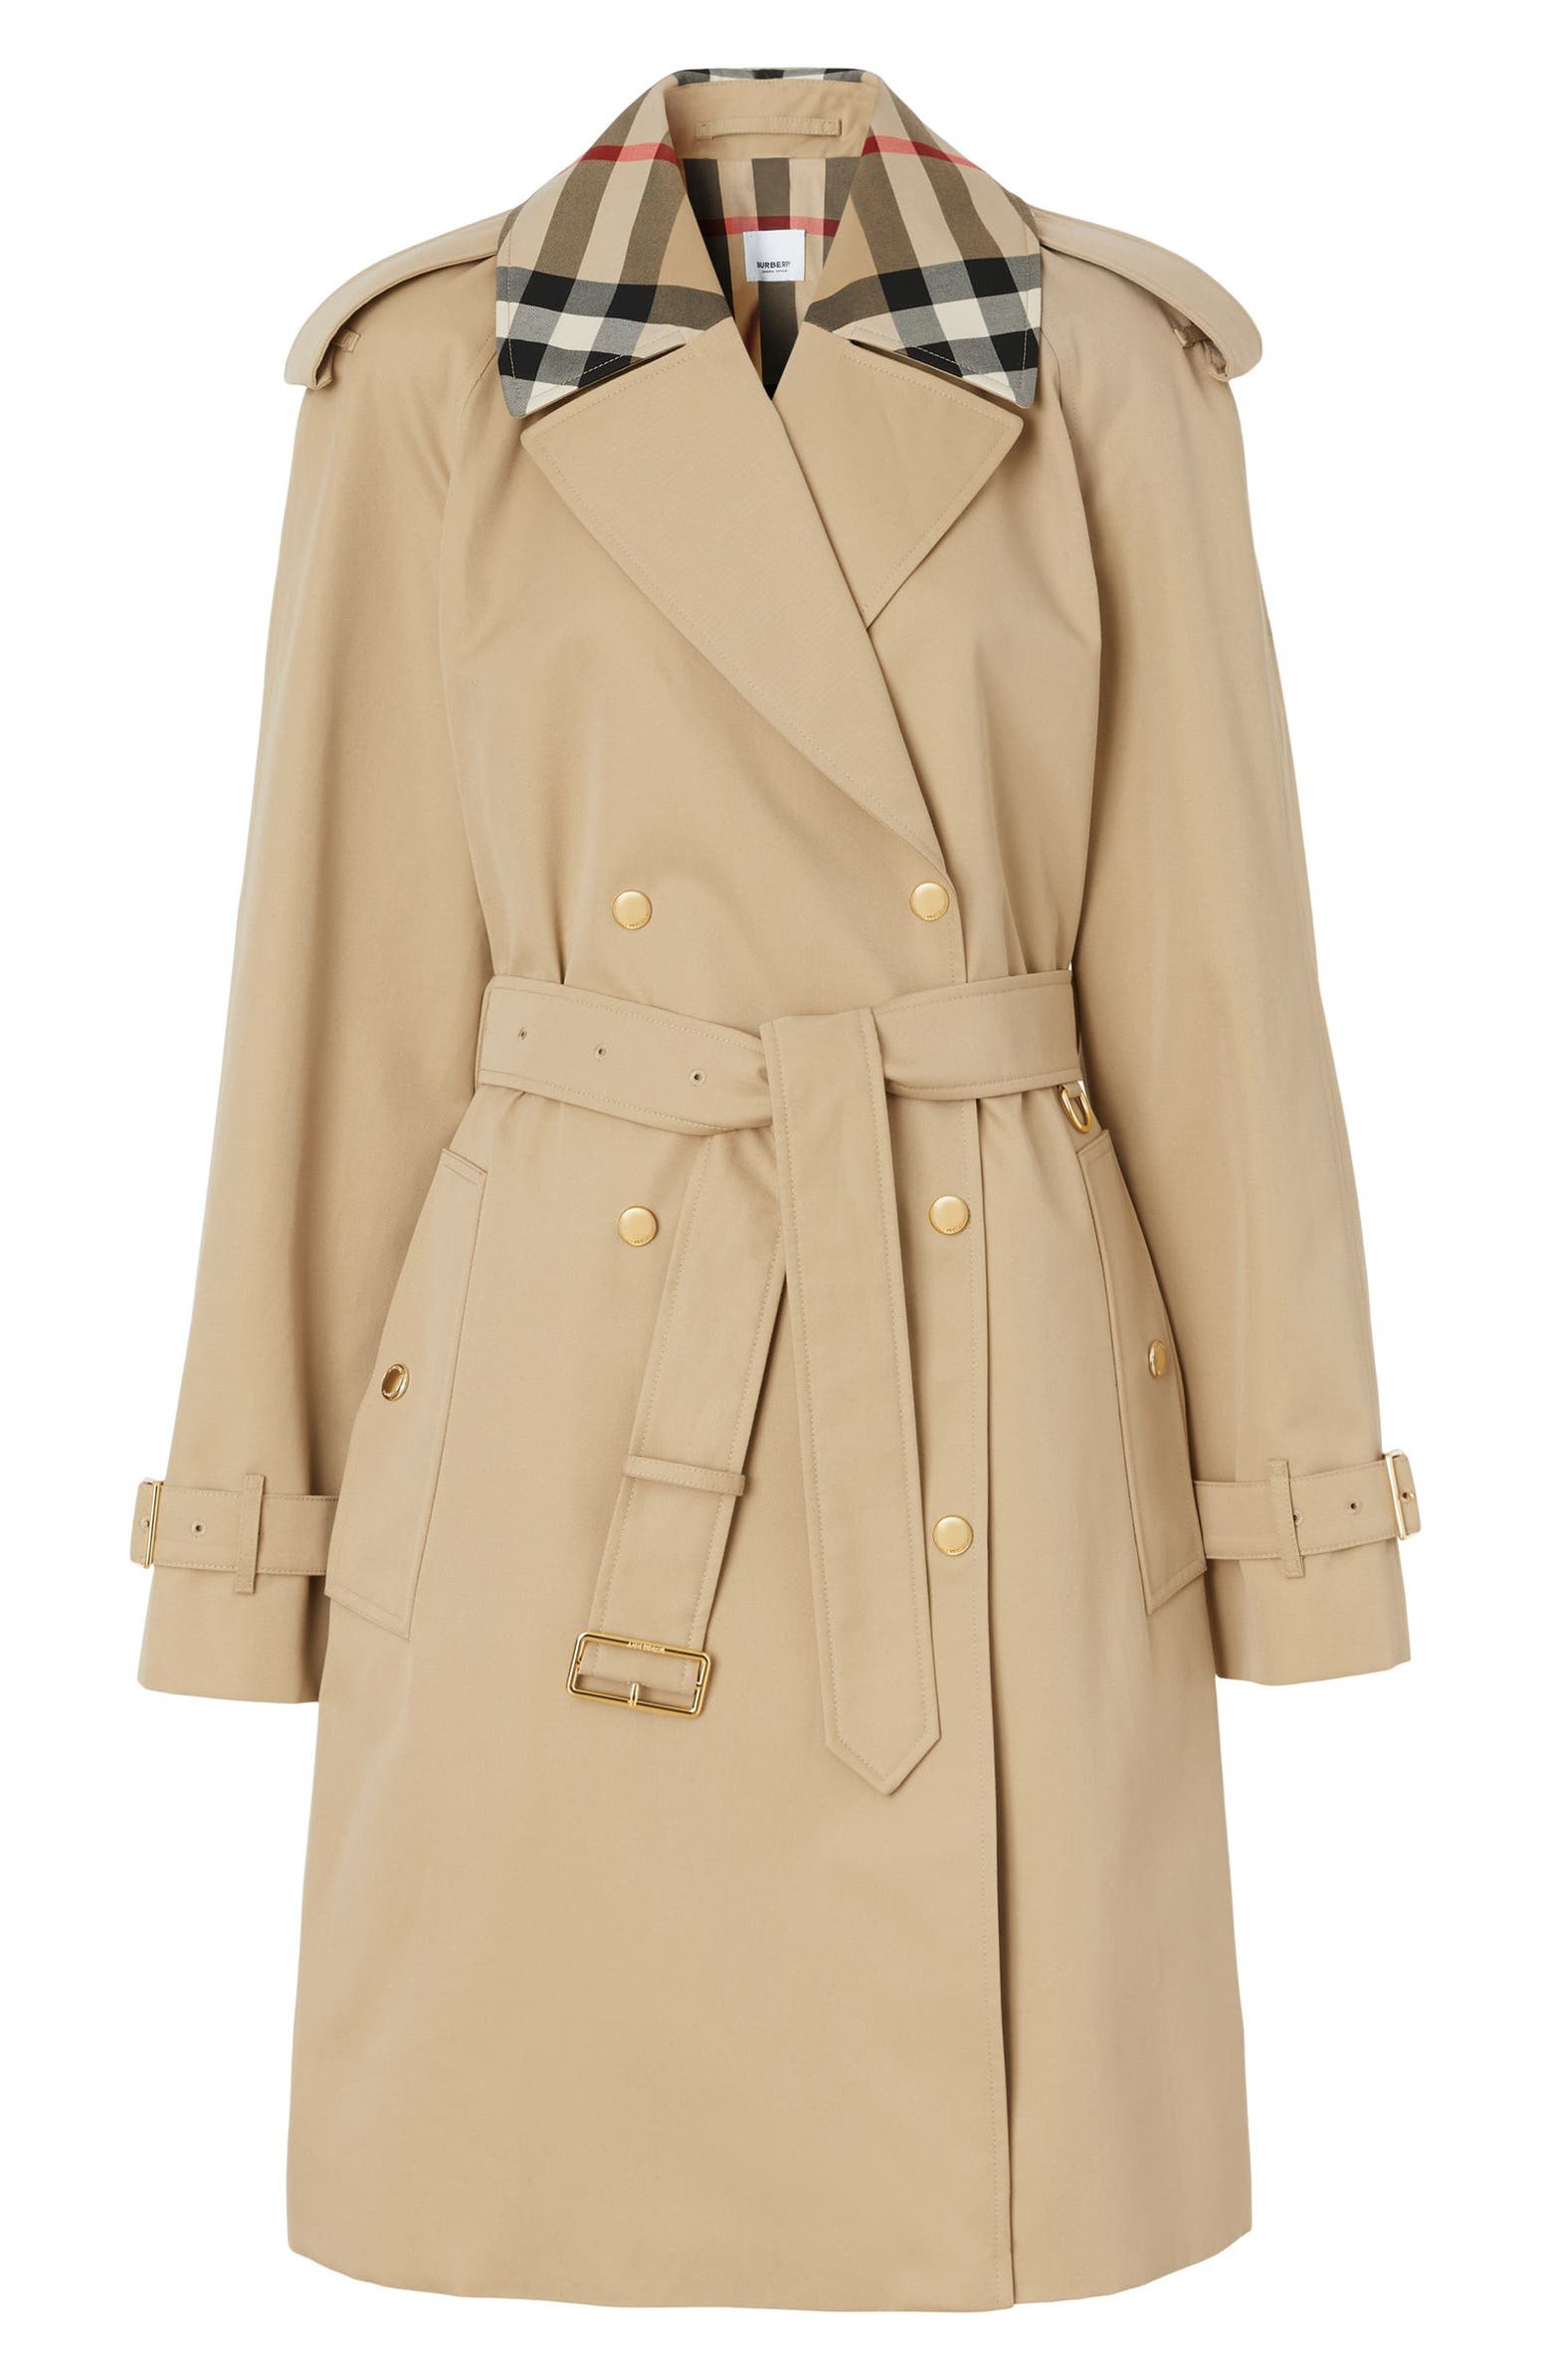 Burberry vs Gucci: Burberry trench coat